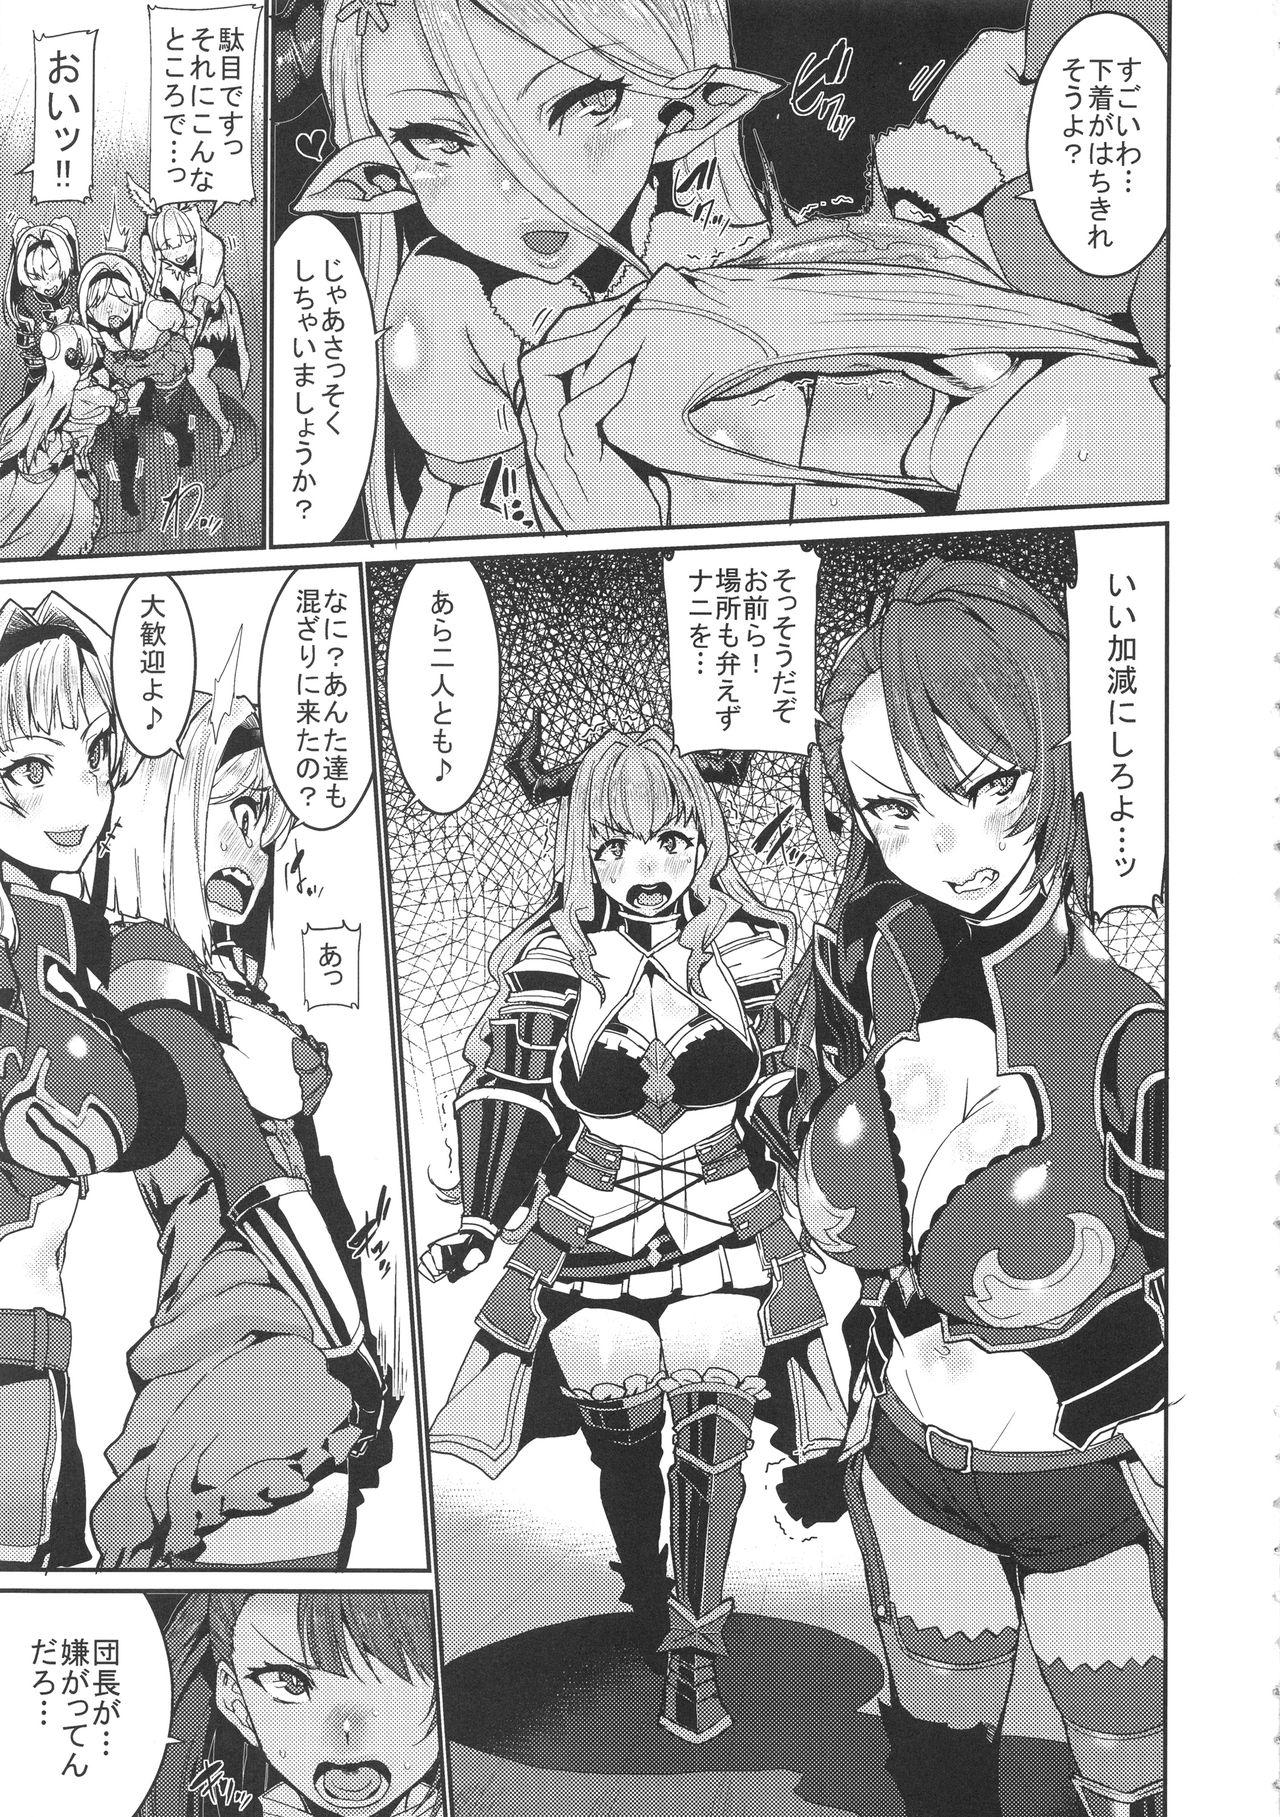 Scandal Be covered, be smeared - Granblue fantasy Cams - Page 7